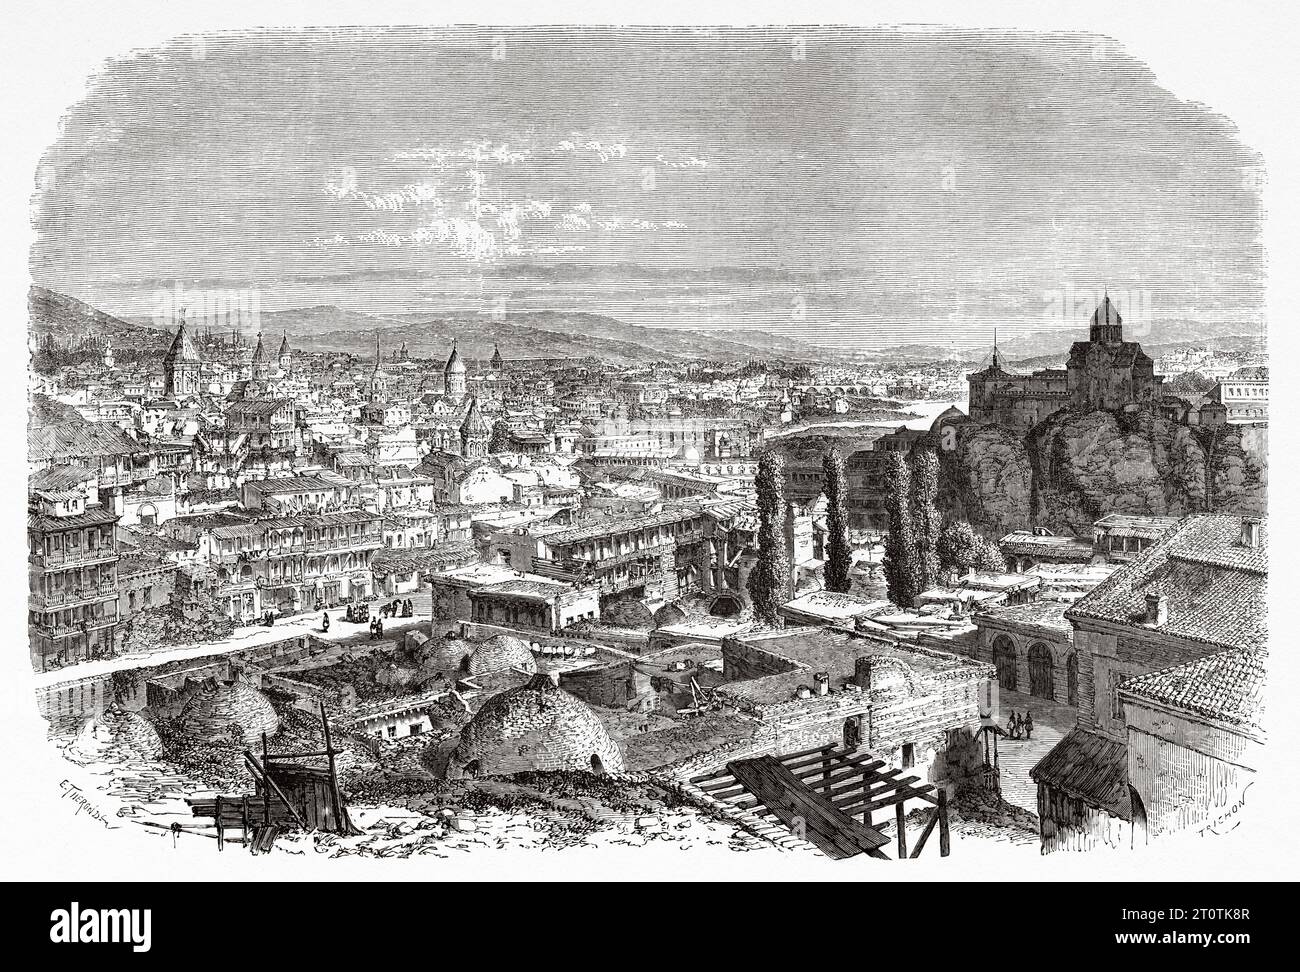 Old view of Tbilisi, Georgia. Voyage to the Black Sea and the Caspian Sea in 1858 by Moynet. Old 19th century engraving from Le Tour du Monde 1860 Stock Photo